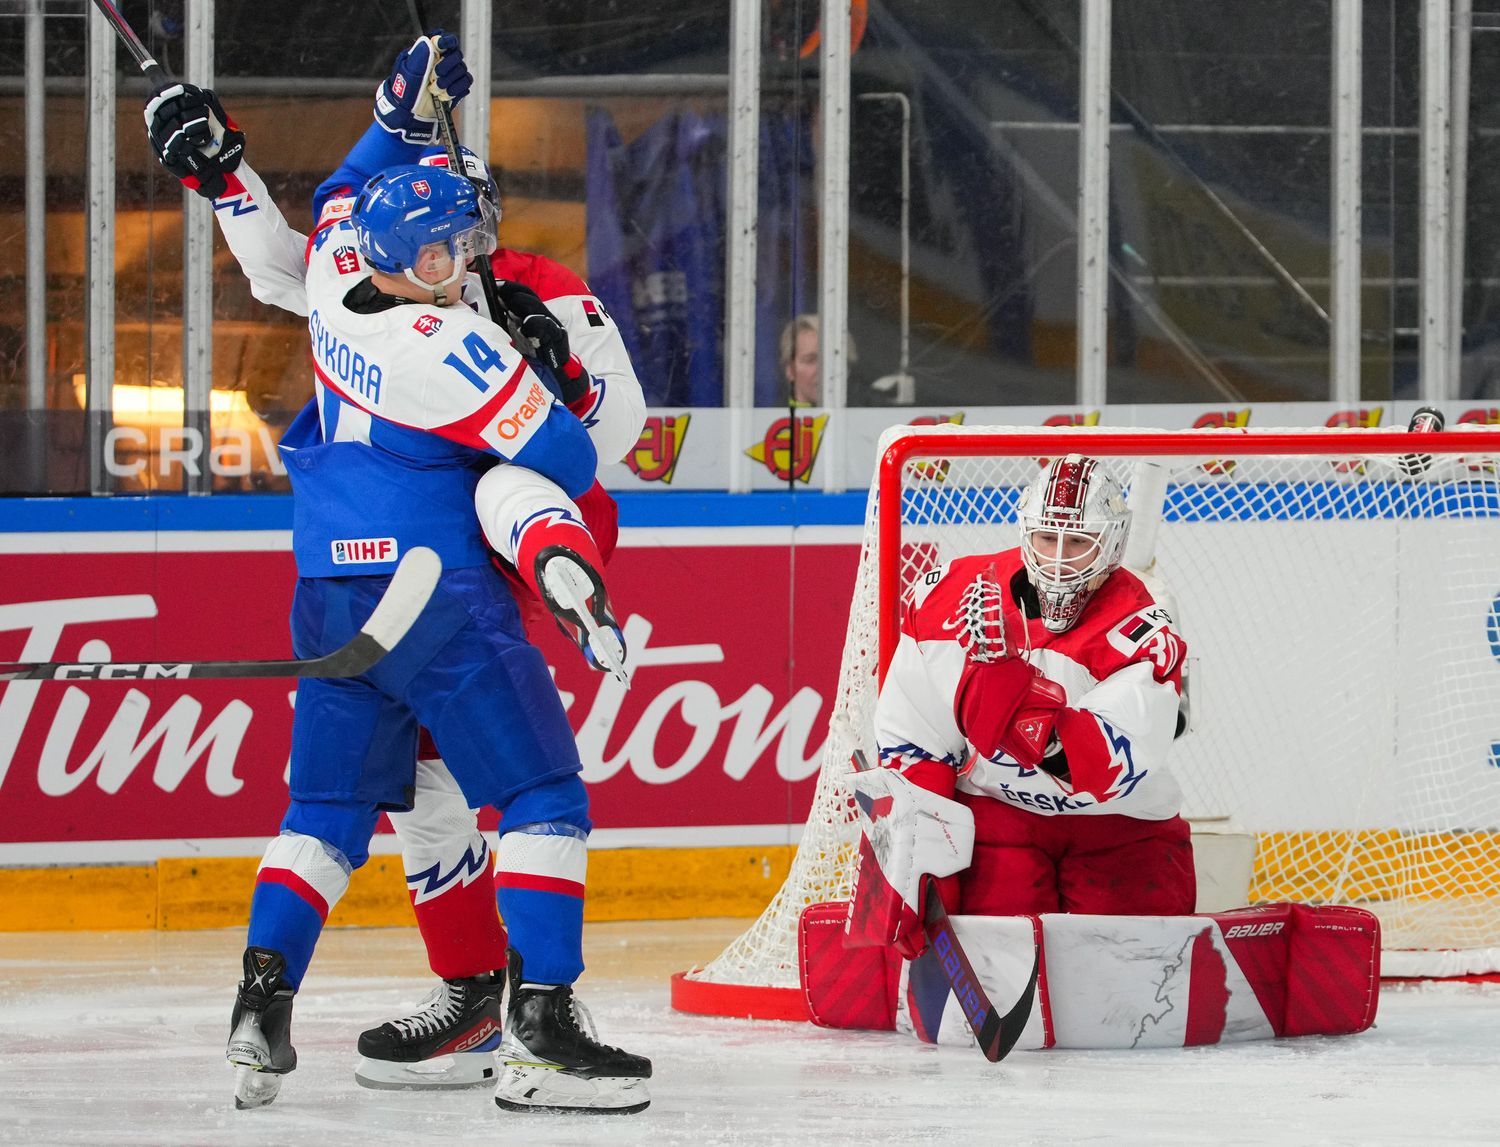 Too bad about the introduction.  Czech hockey team lost to Slovakia 2:6